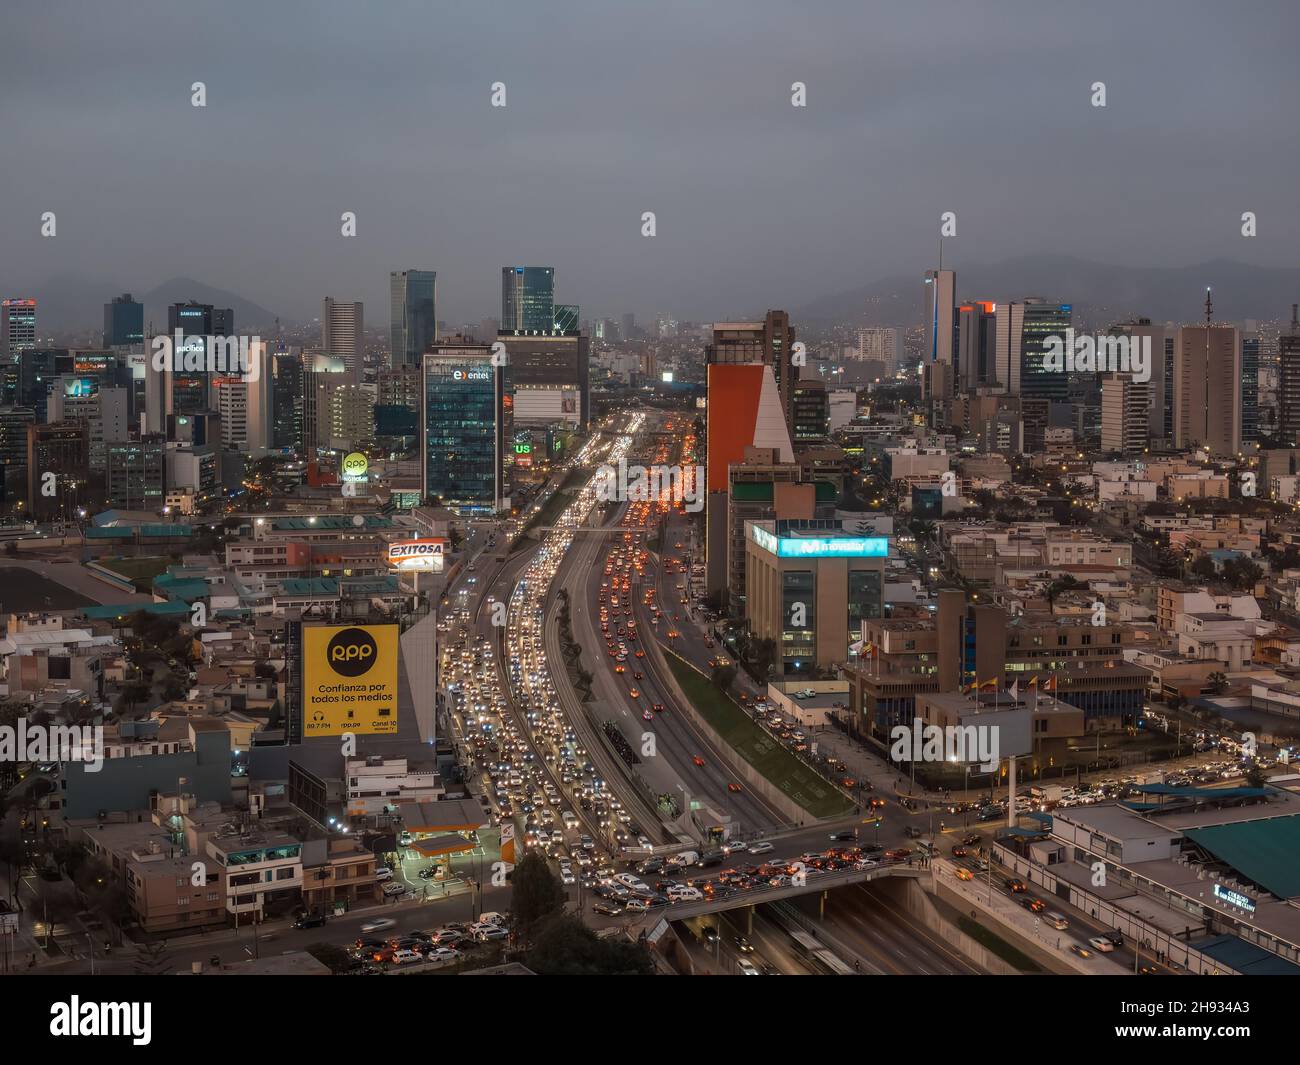 Lima, Peru - 23.10.2019 - Panoramic aerial view over Via Expresa freeway and the business center of San Isidro District Stock Photo